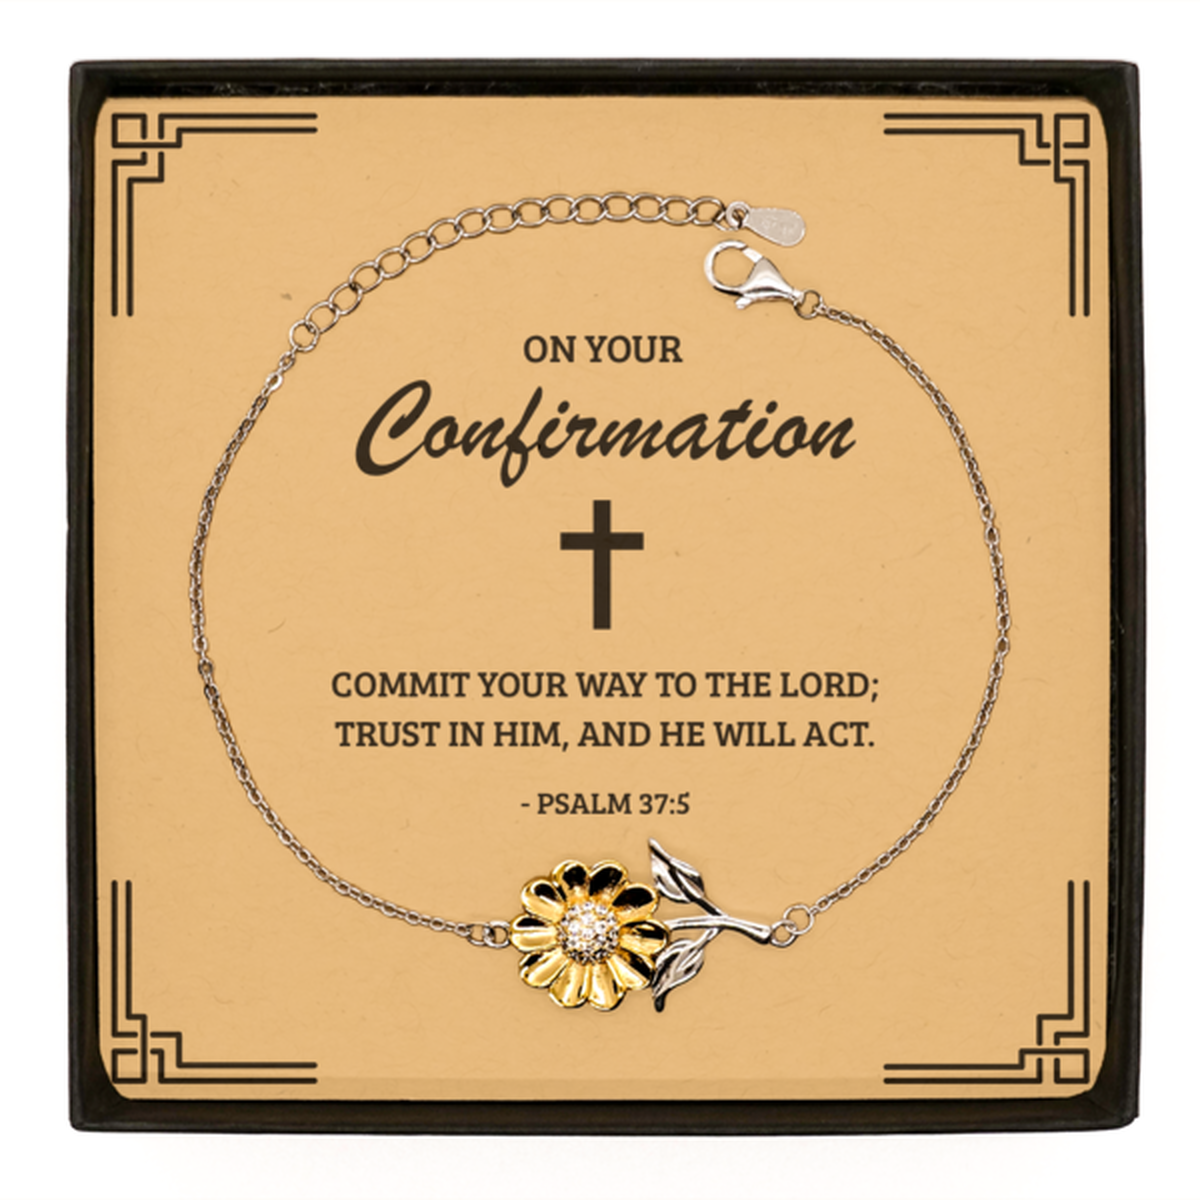 Confirmation Gifts for Teenage Girls, Commit your way to the Lord, .925 Sterling Silver Sunflower Bracelet with Bible Verse Message Card, Religious Catholic Bracelet for Daughter, Granddaughter